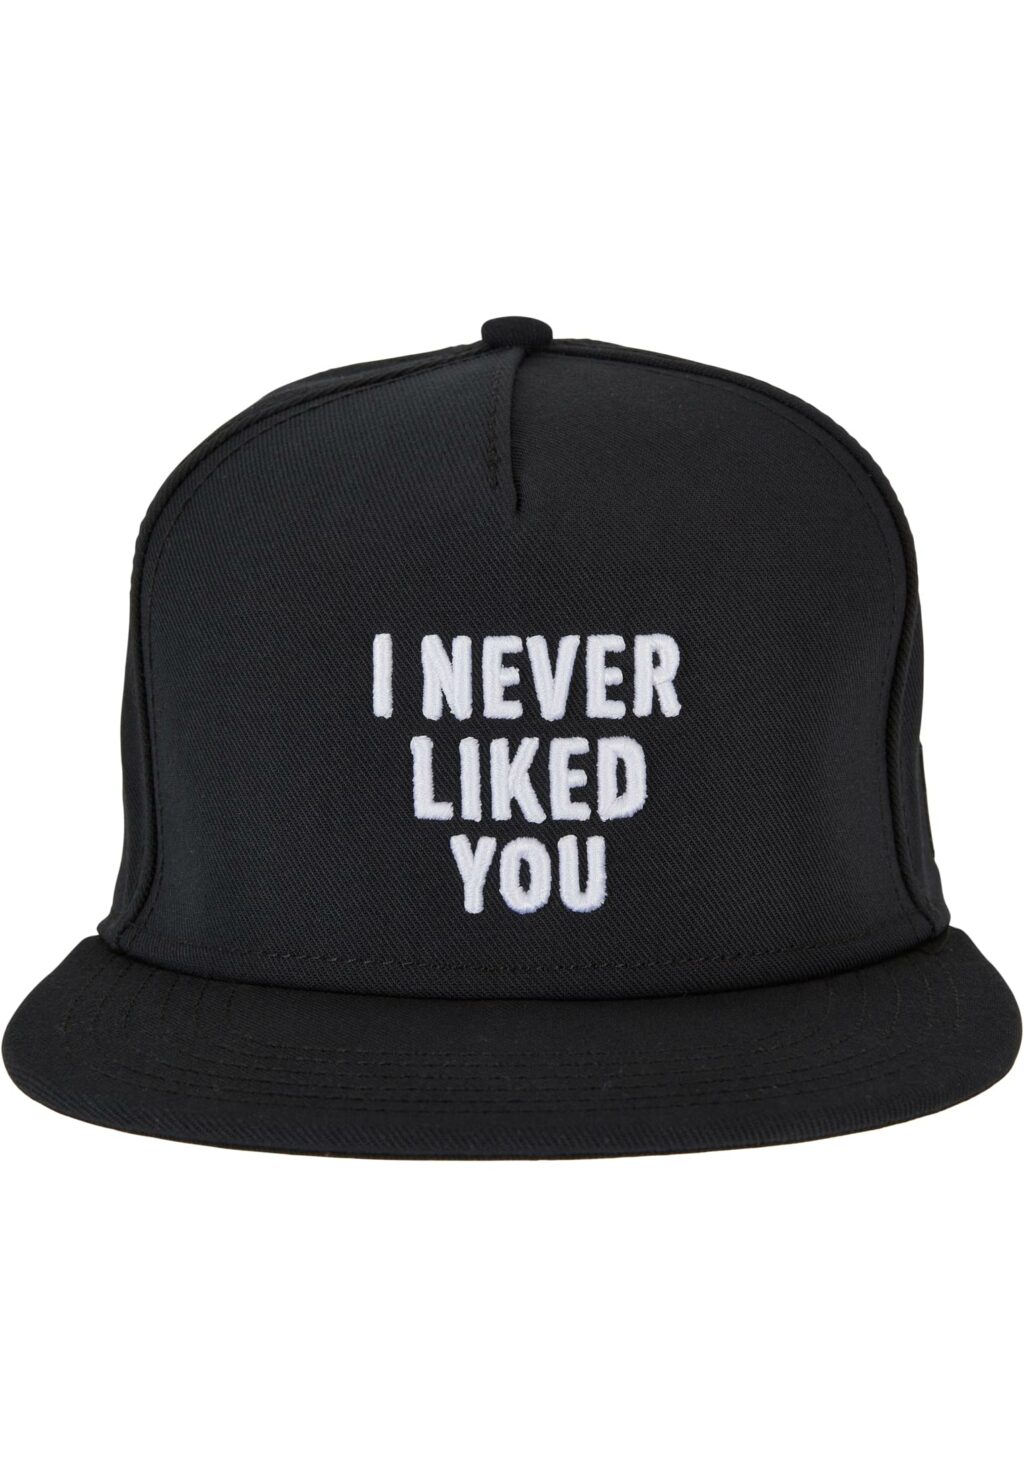 Never Liked You P Cap black one CS3097